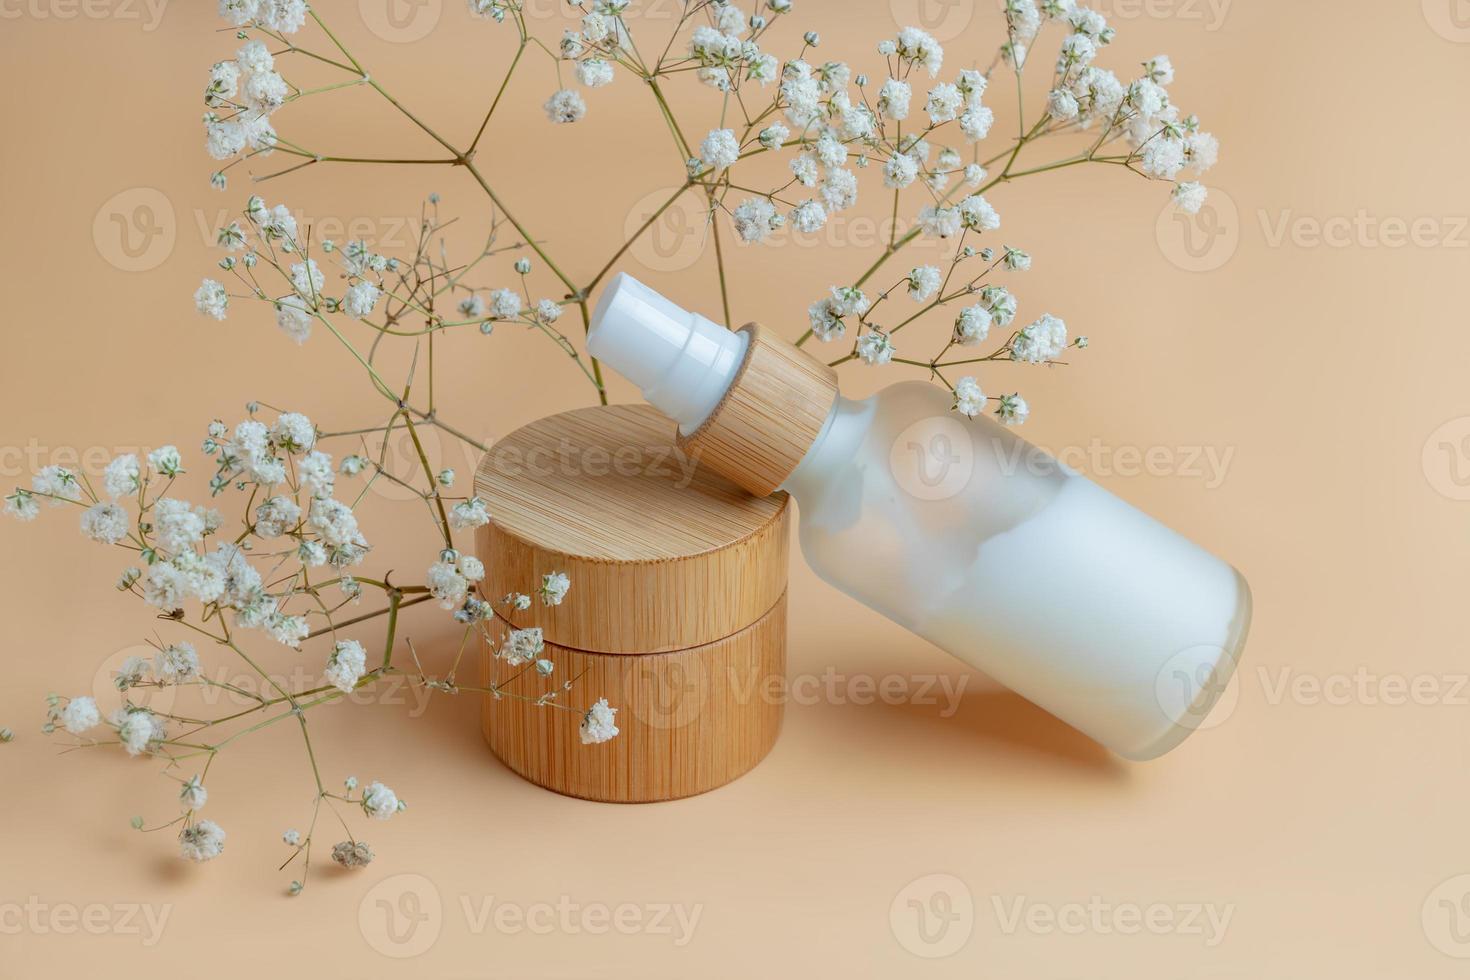 Pomp bottle with face fluid and bamboo jar with cream on beige background with dry flowers. Skincare serum or essential oil natural cosmetic. Beauty concept for face and body care. Mockup photo